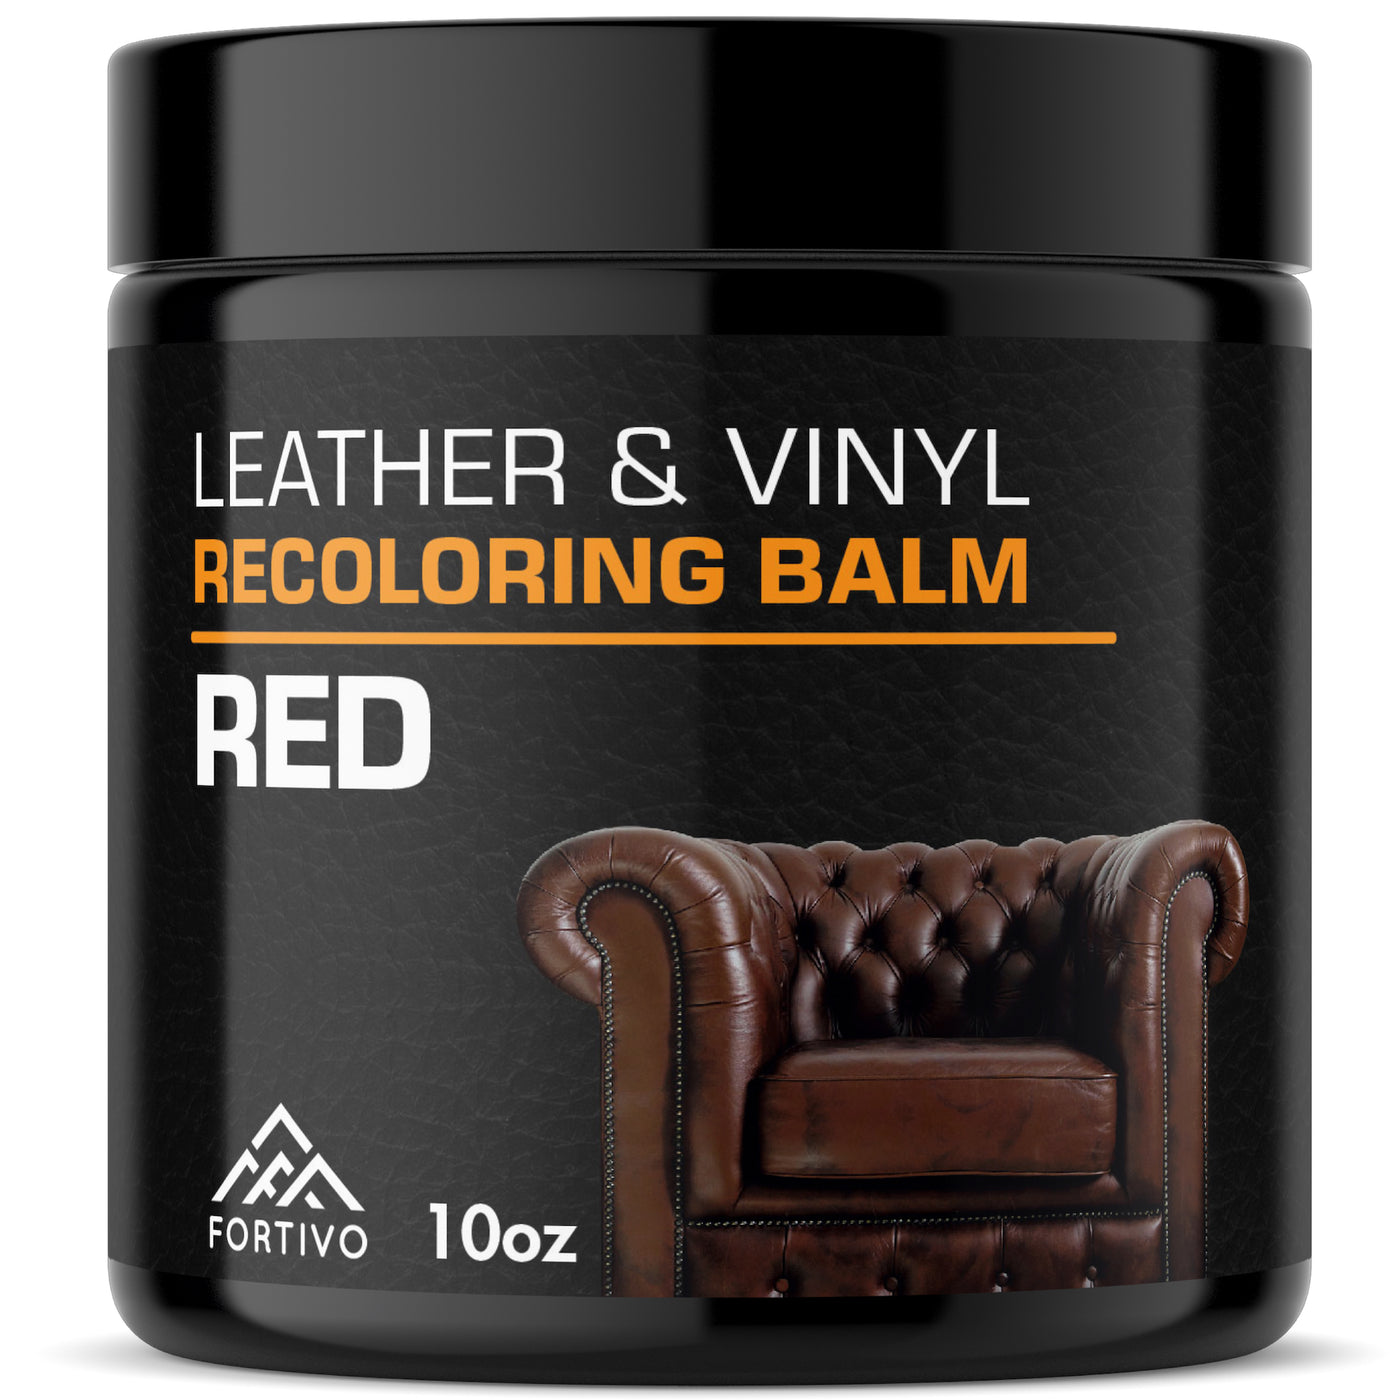 Radiant red leather paint for rejuvenating leather items